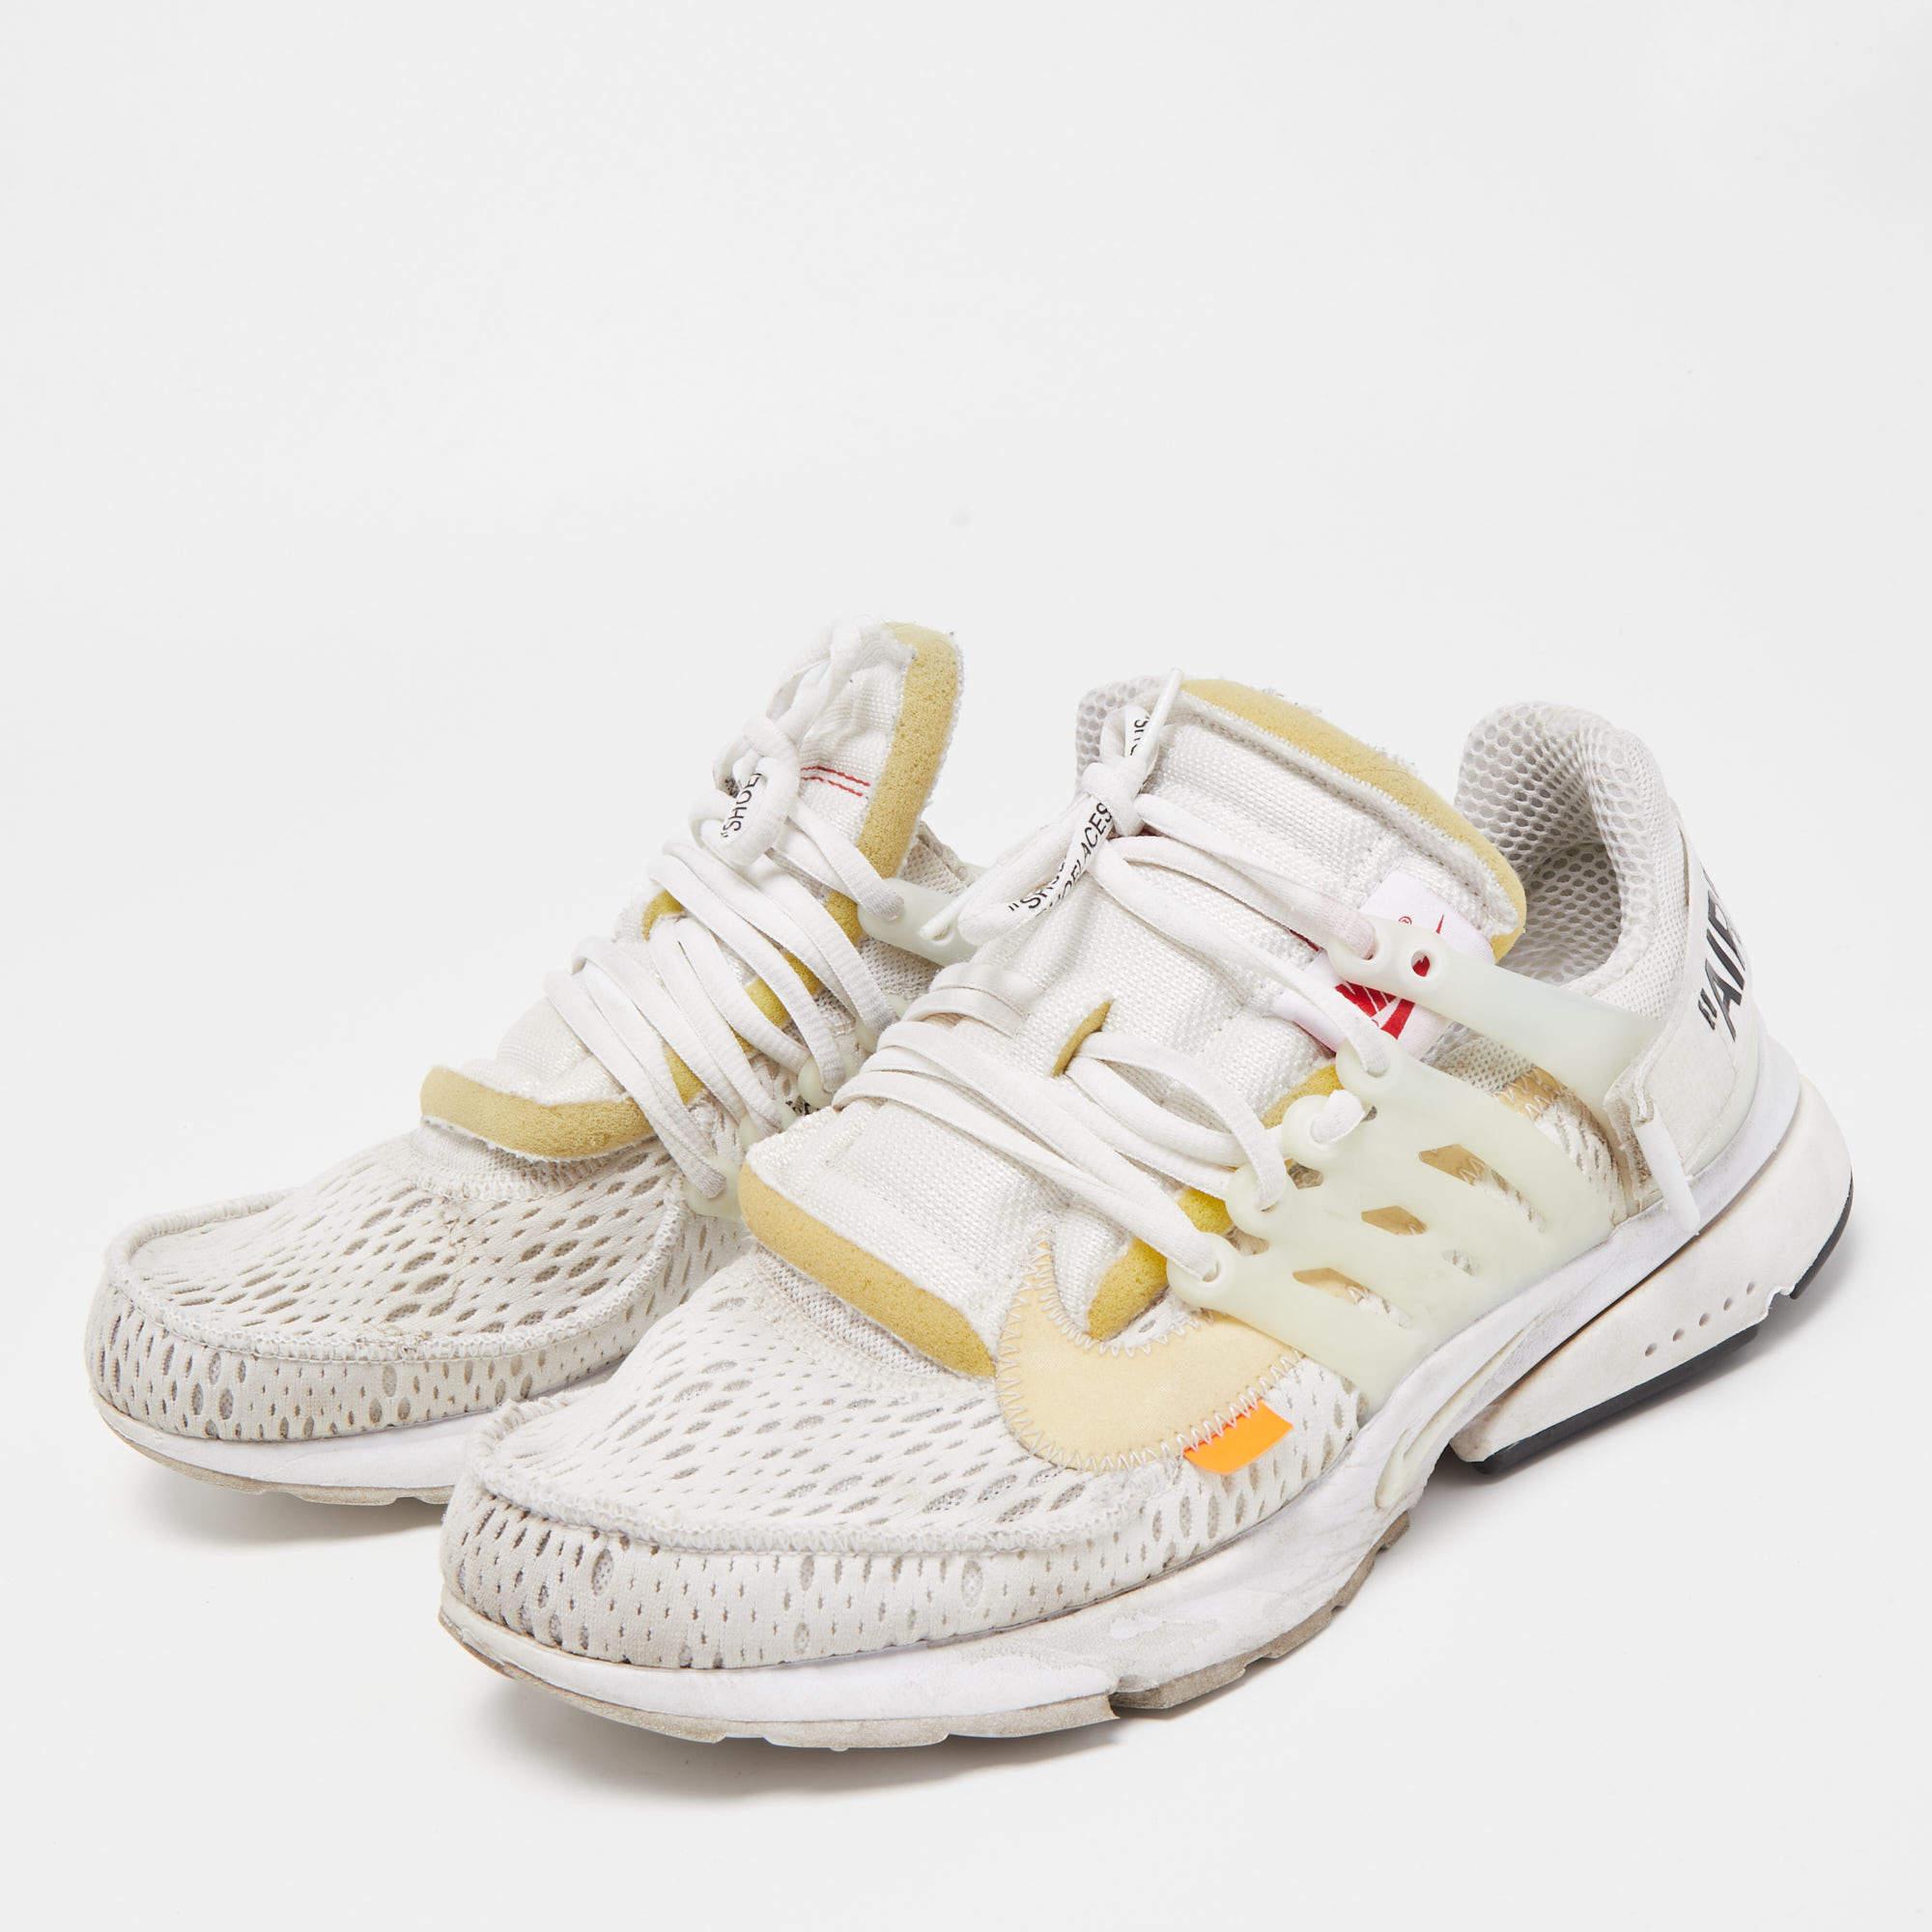 Men's Nike x Off White White Fabric Air Presto Low Trainers Sneakers Size 42.5 For Sale